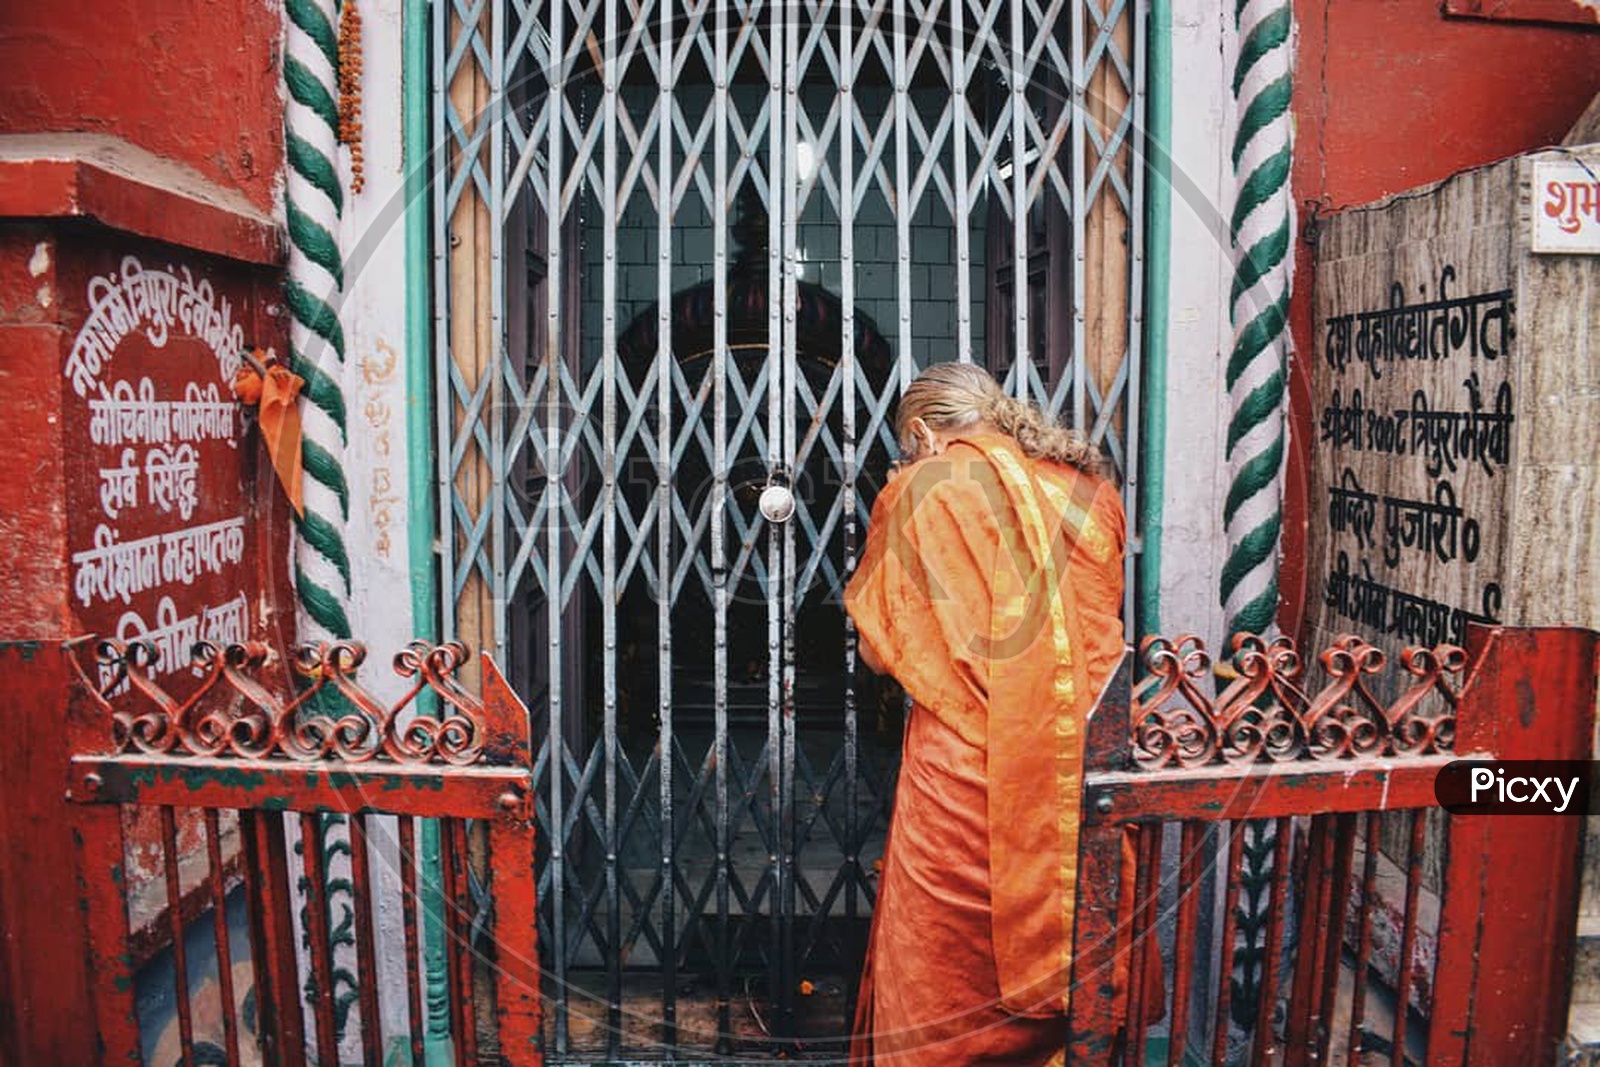 An Old Woman Devotee Offering Prayers To God In Hindu Temple